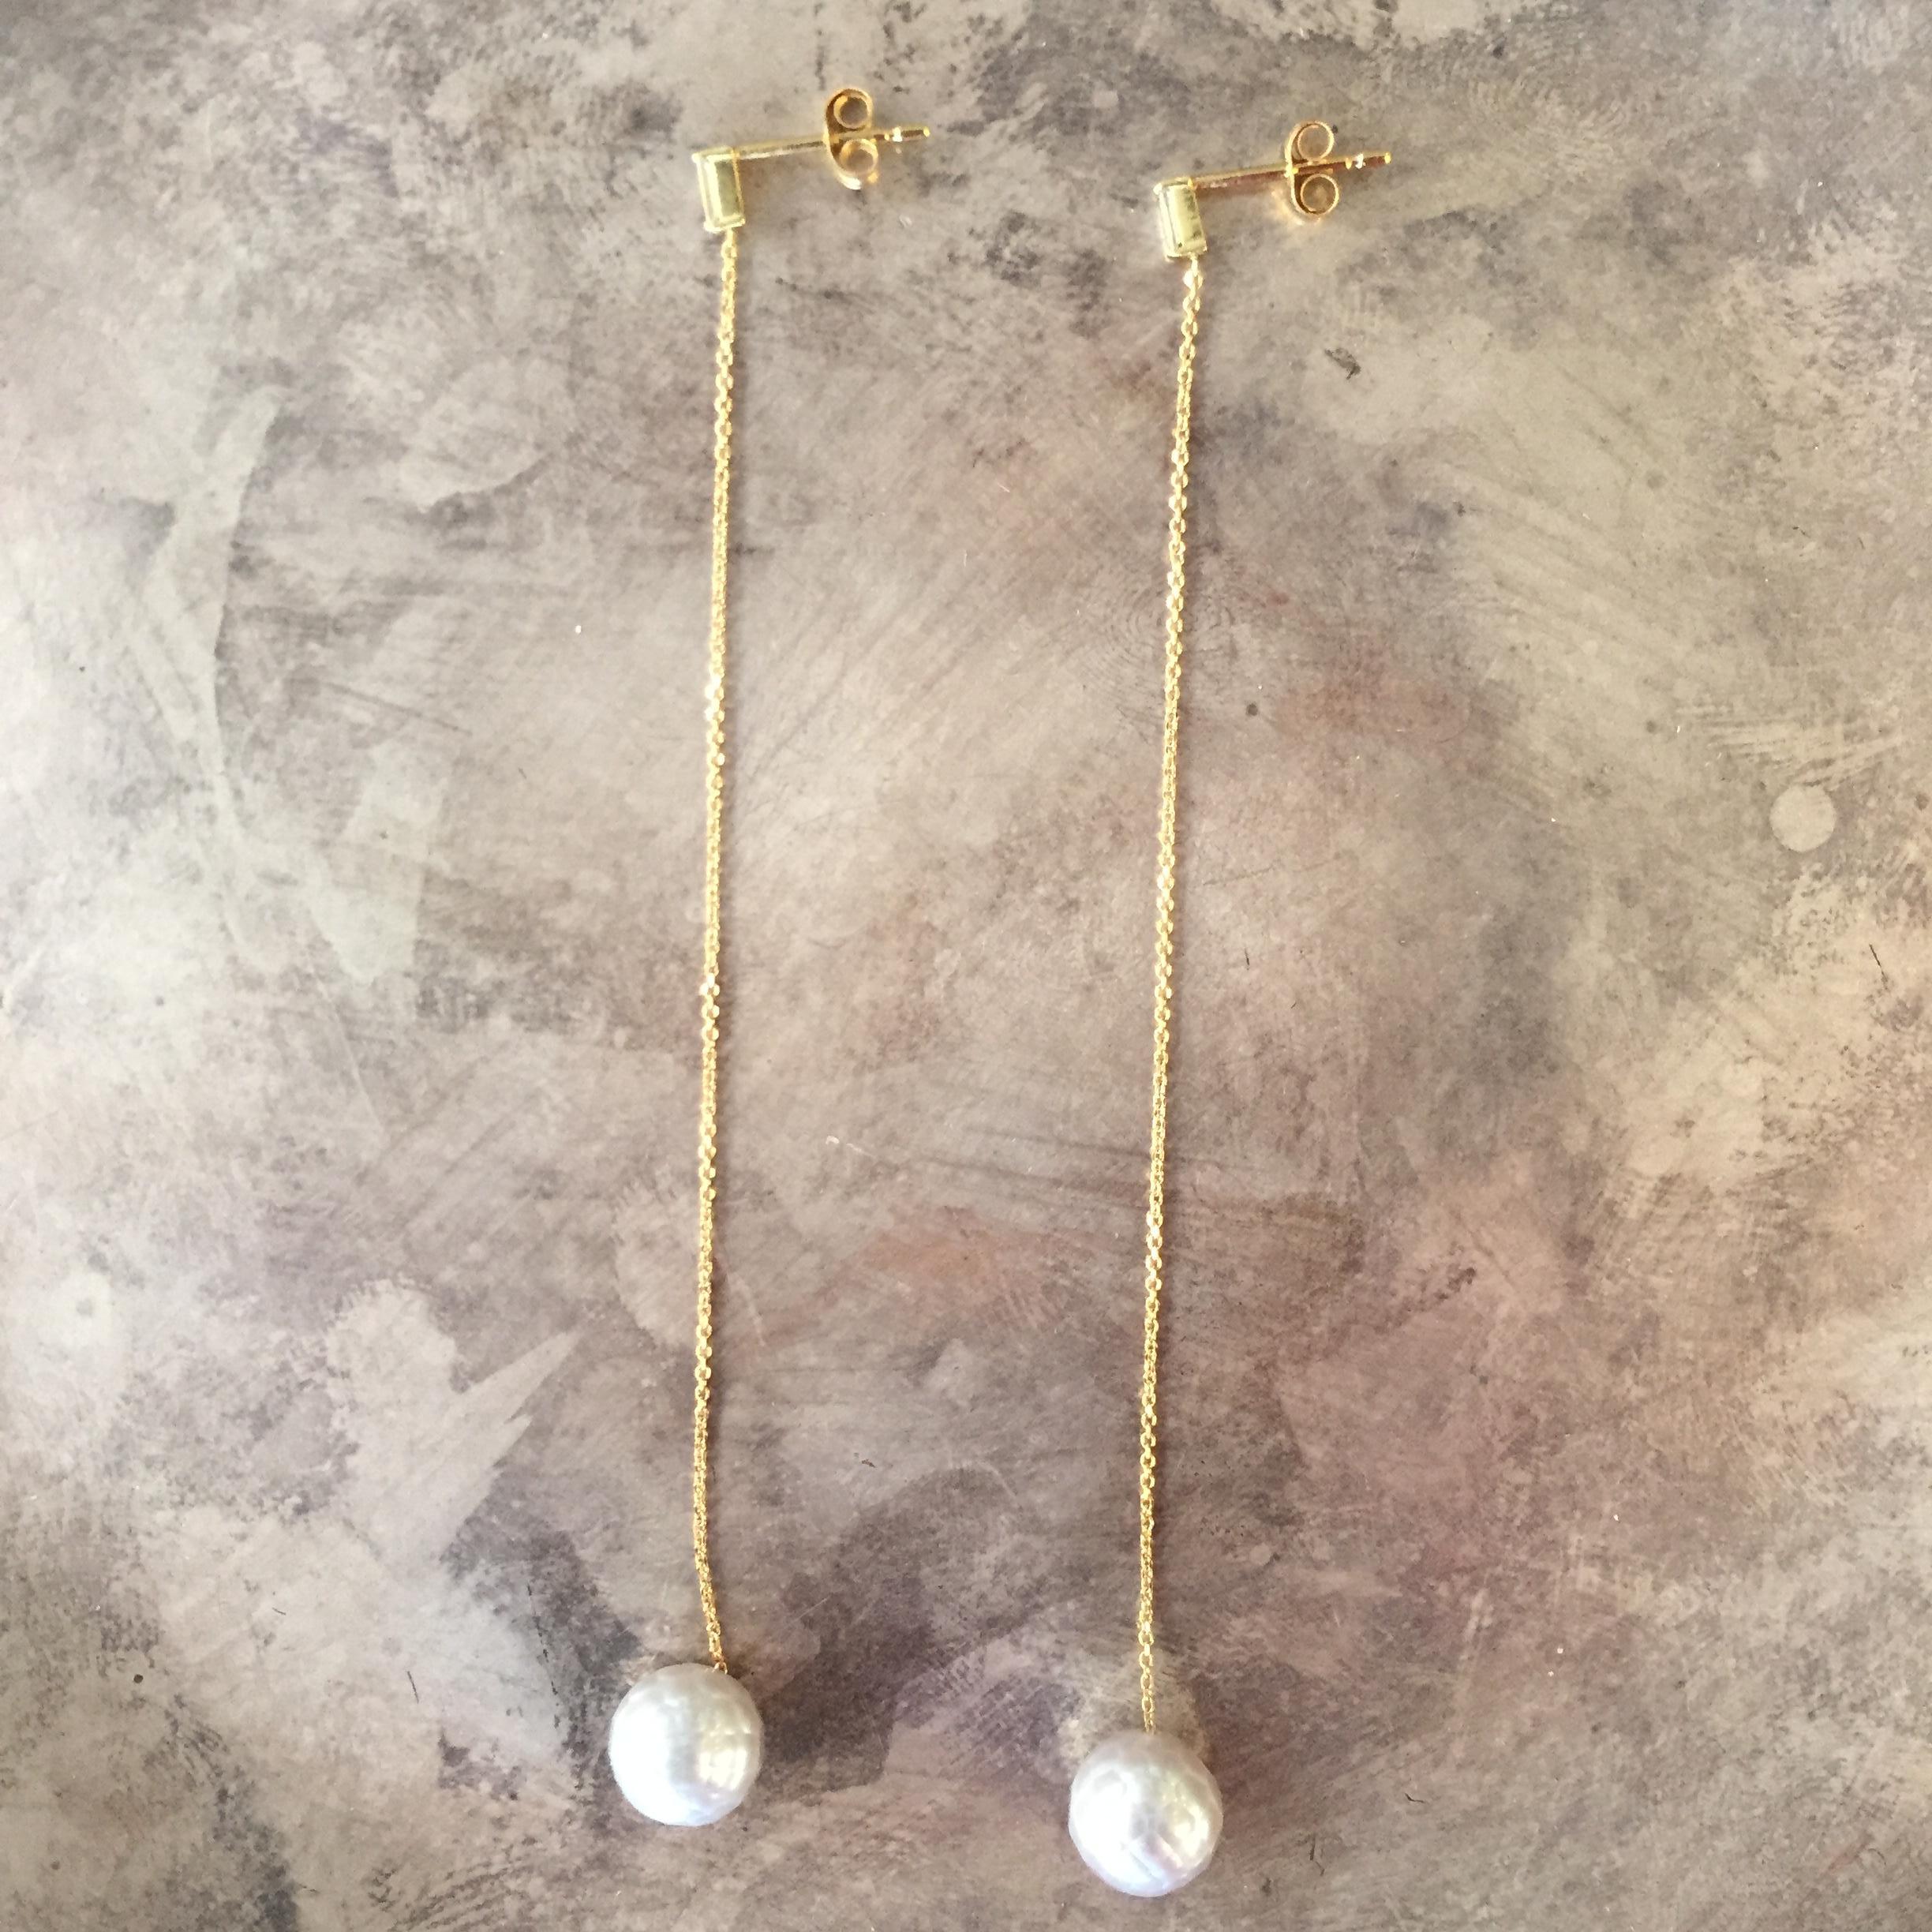 An elegant pair of long drop earrings by Sweet Pea in 18k yellow gold. The total diamond weight is 0.1ct. Total length of each earring is 8.7cm. Glittering fine chain connects the baguette cut diamond studs to the unique faceted grey pearl drops